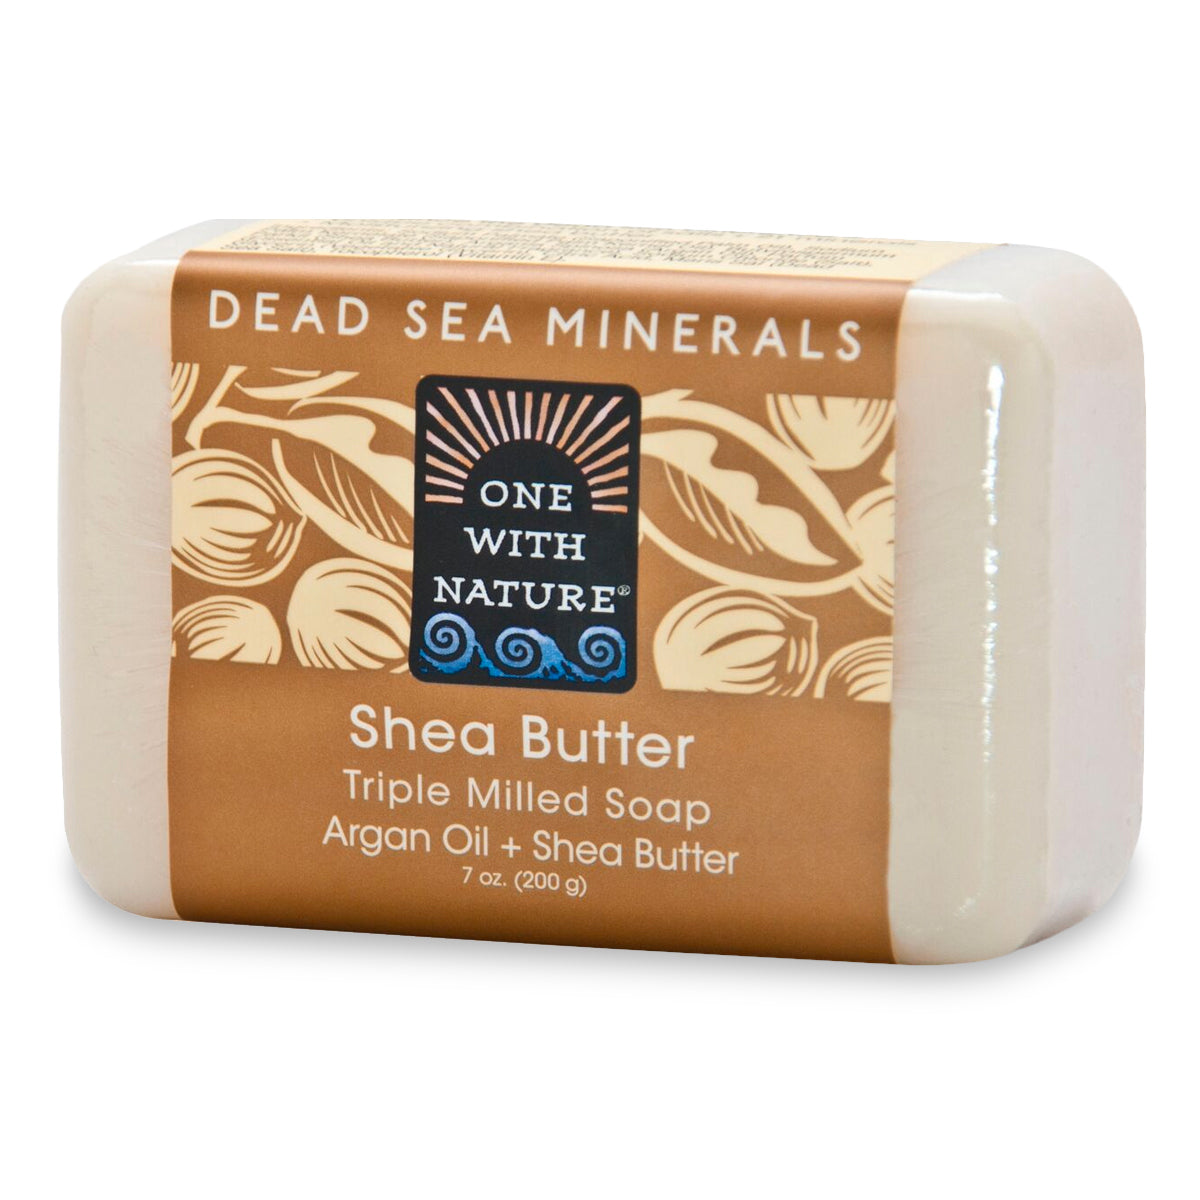 Primary image of Dead Sea Mineral Soap - Shea Butter